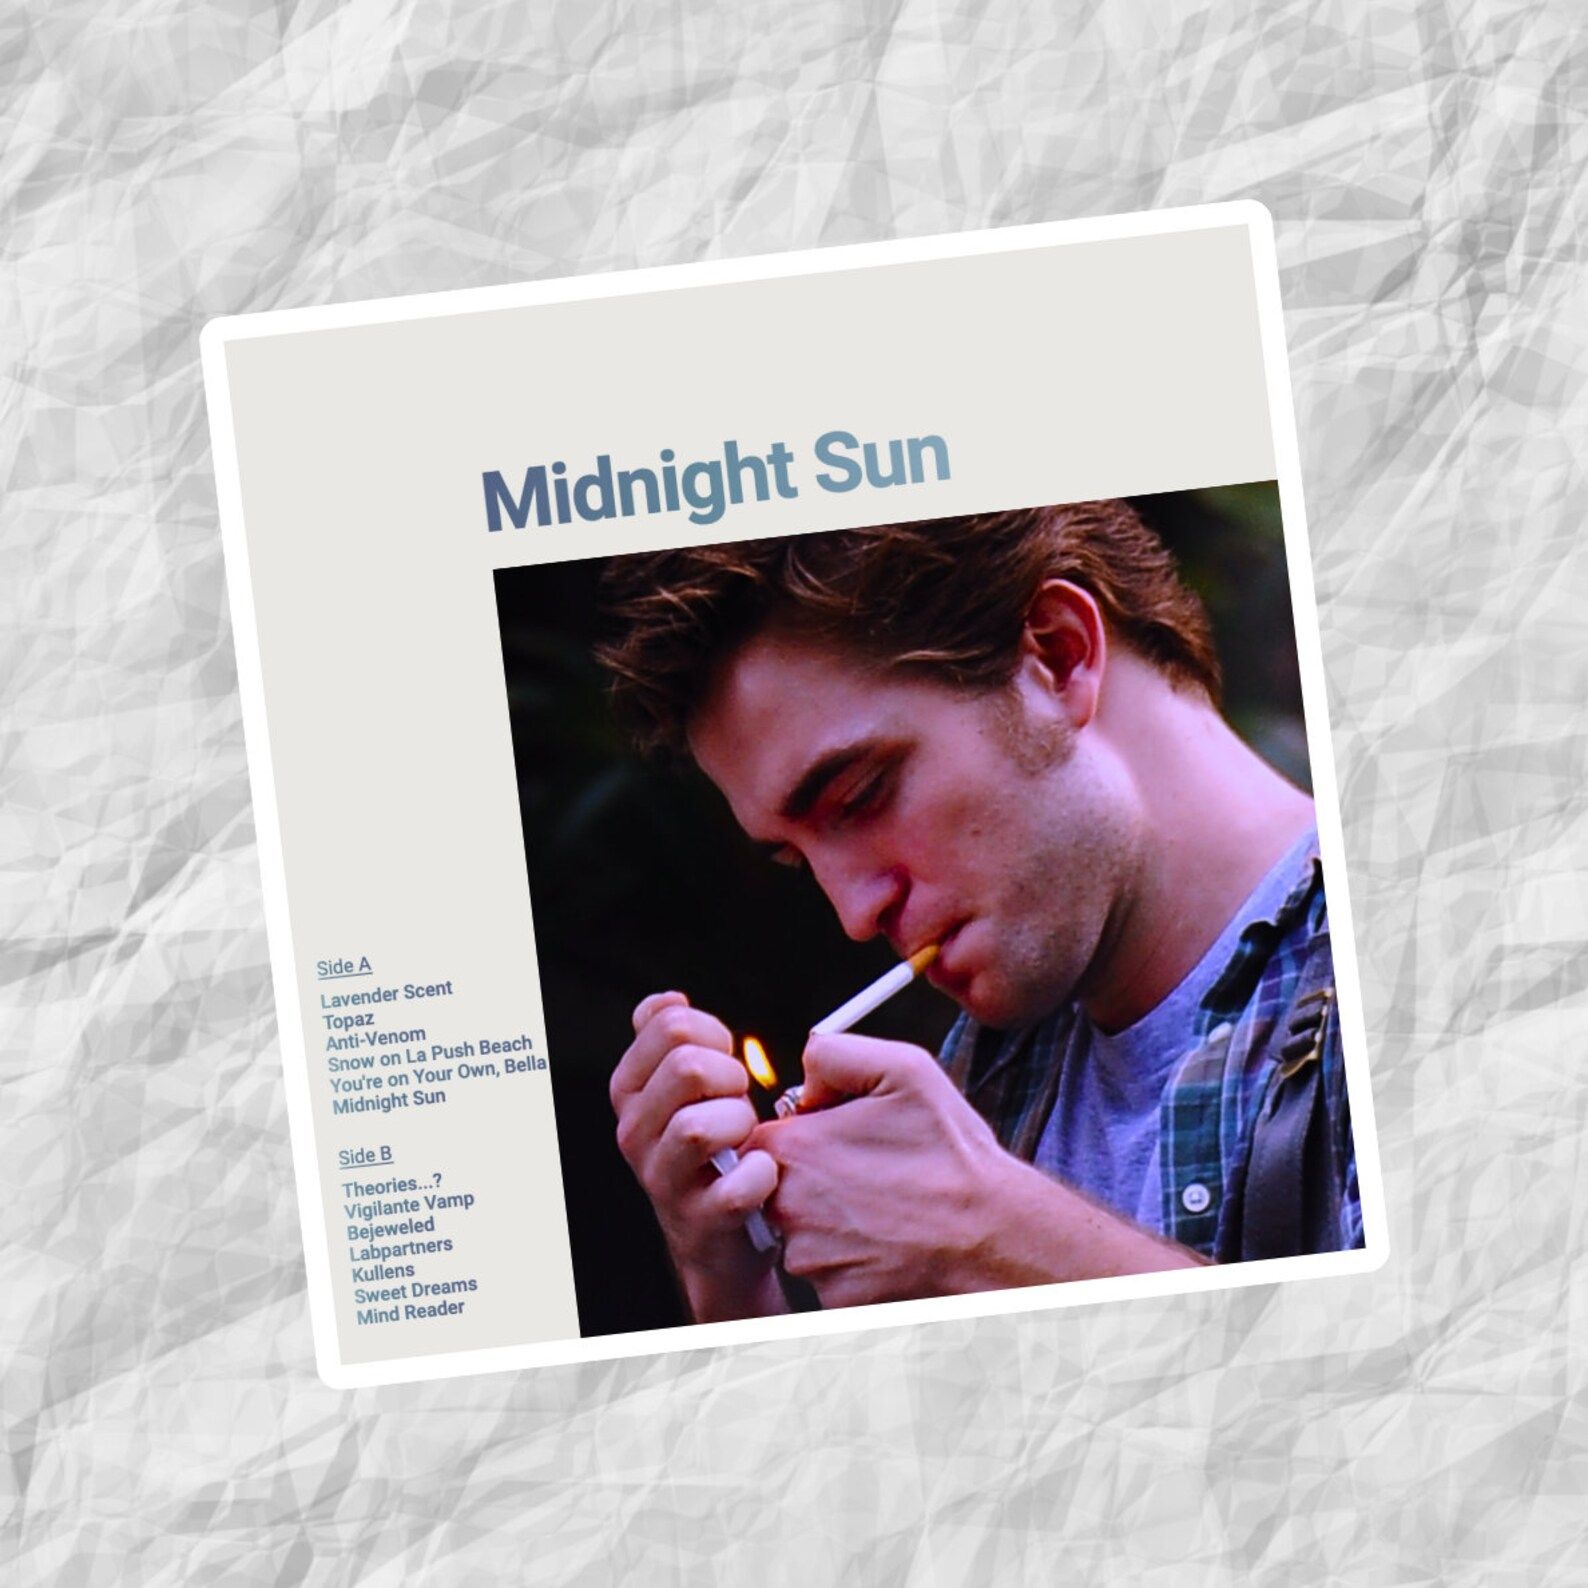 sticker that looks like Taylor Swift's Midnights album, but it is titled "Midnight Sun" and is a riff on Twilight. 